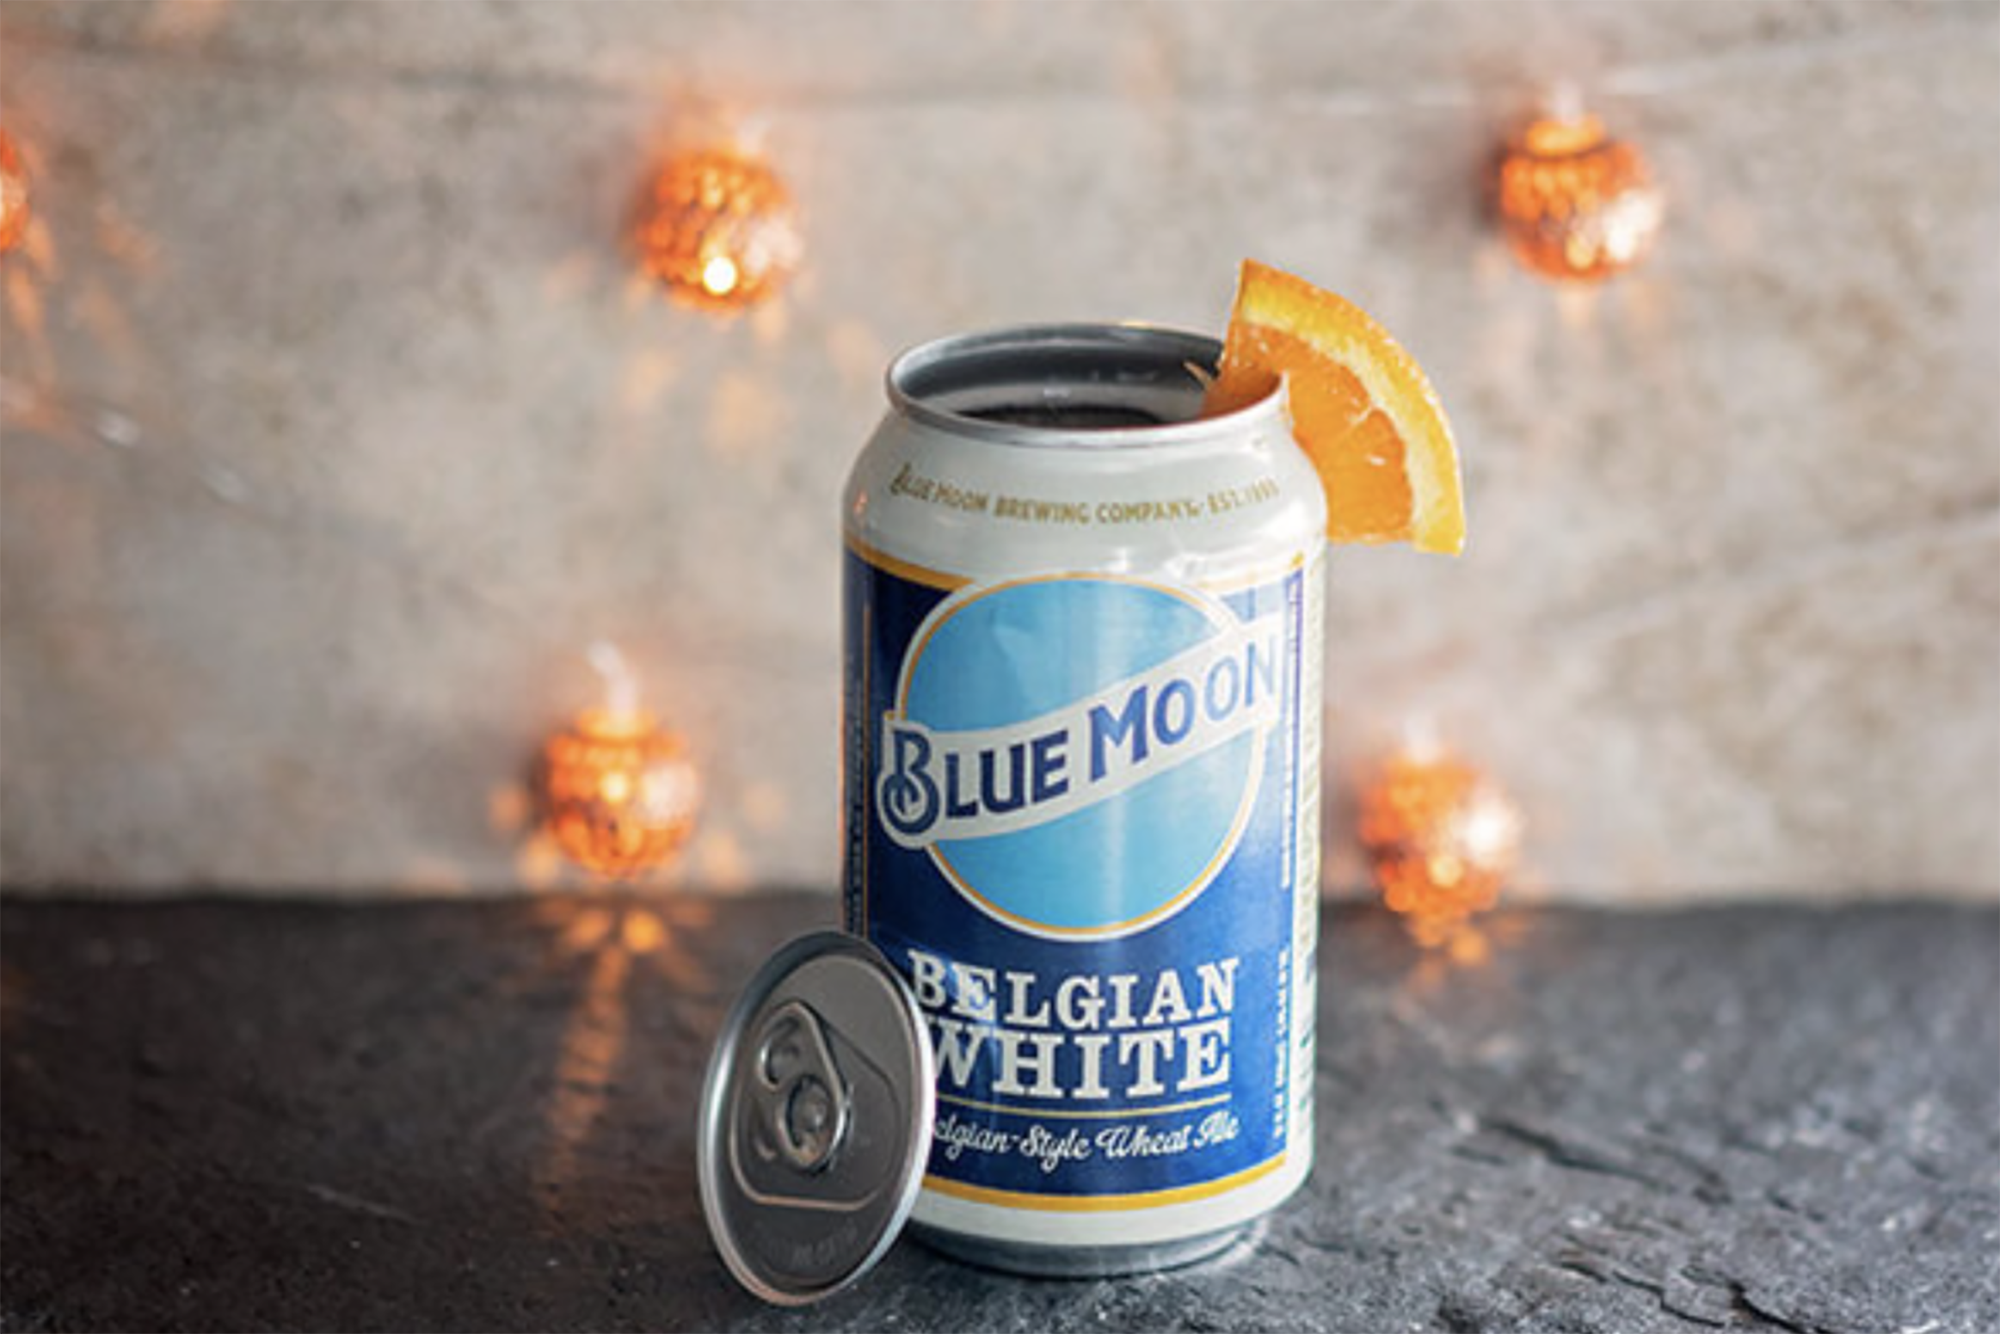 A can of Blue moon with the cap cut off and an orange wedge in the can